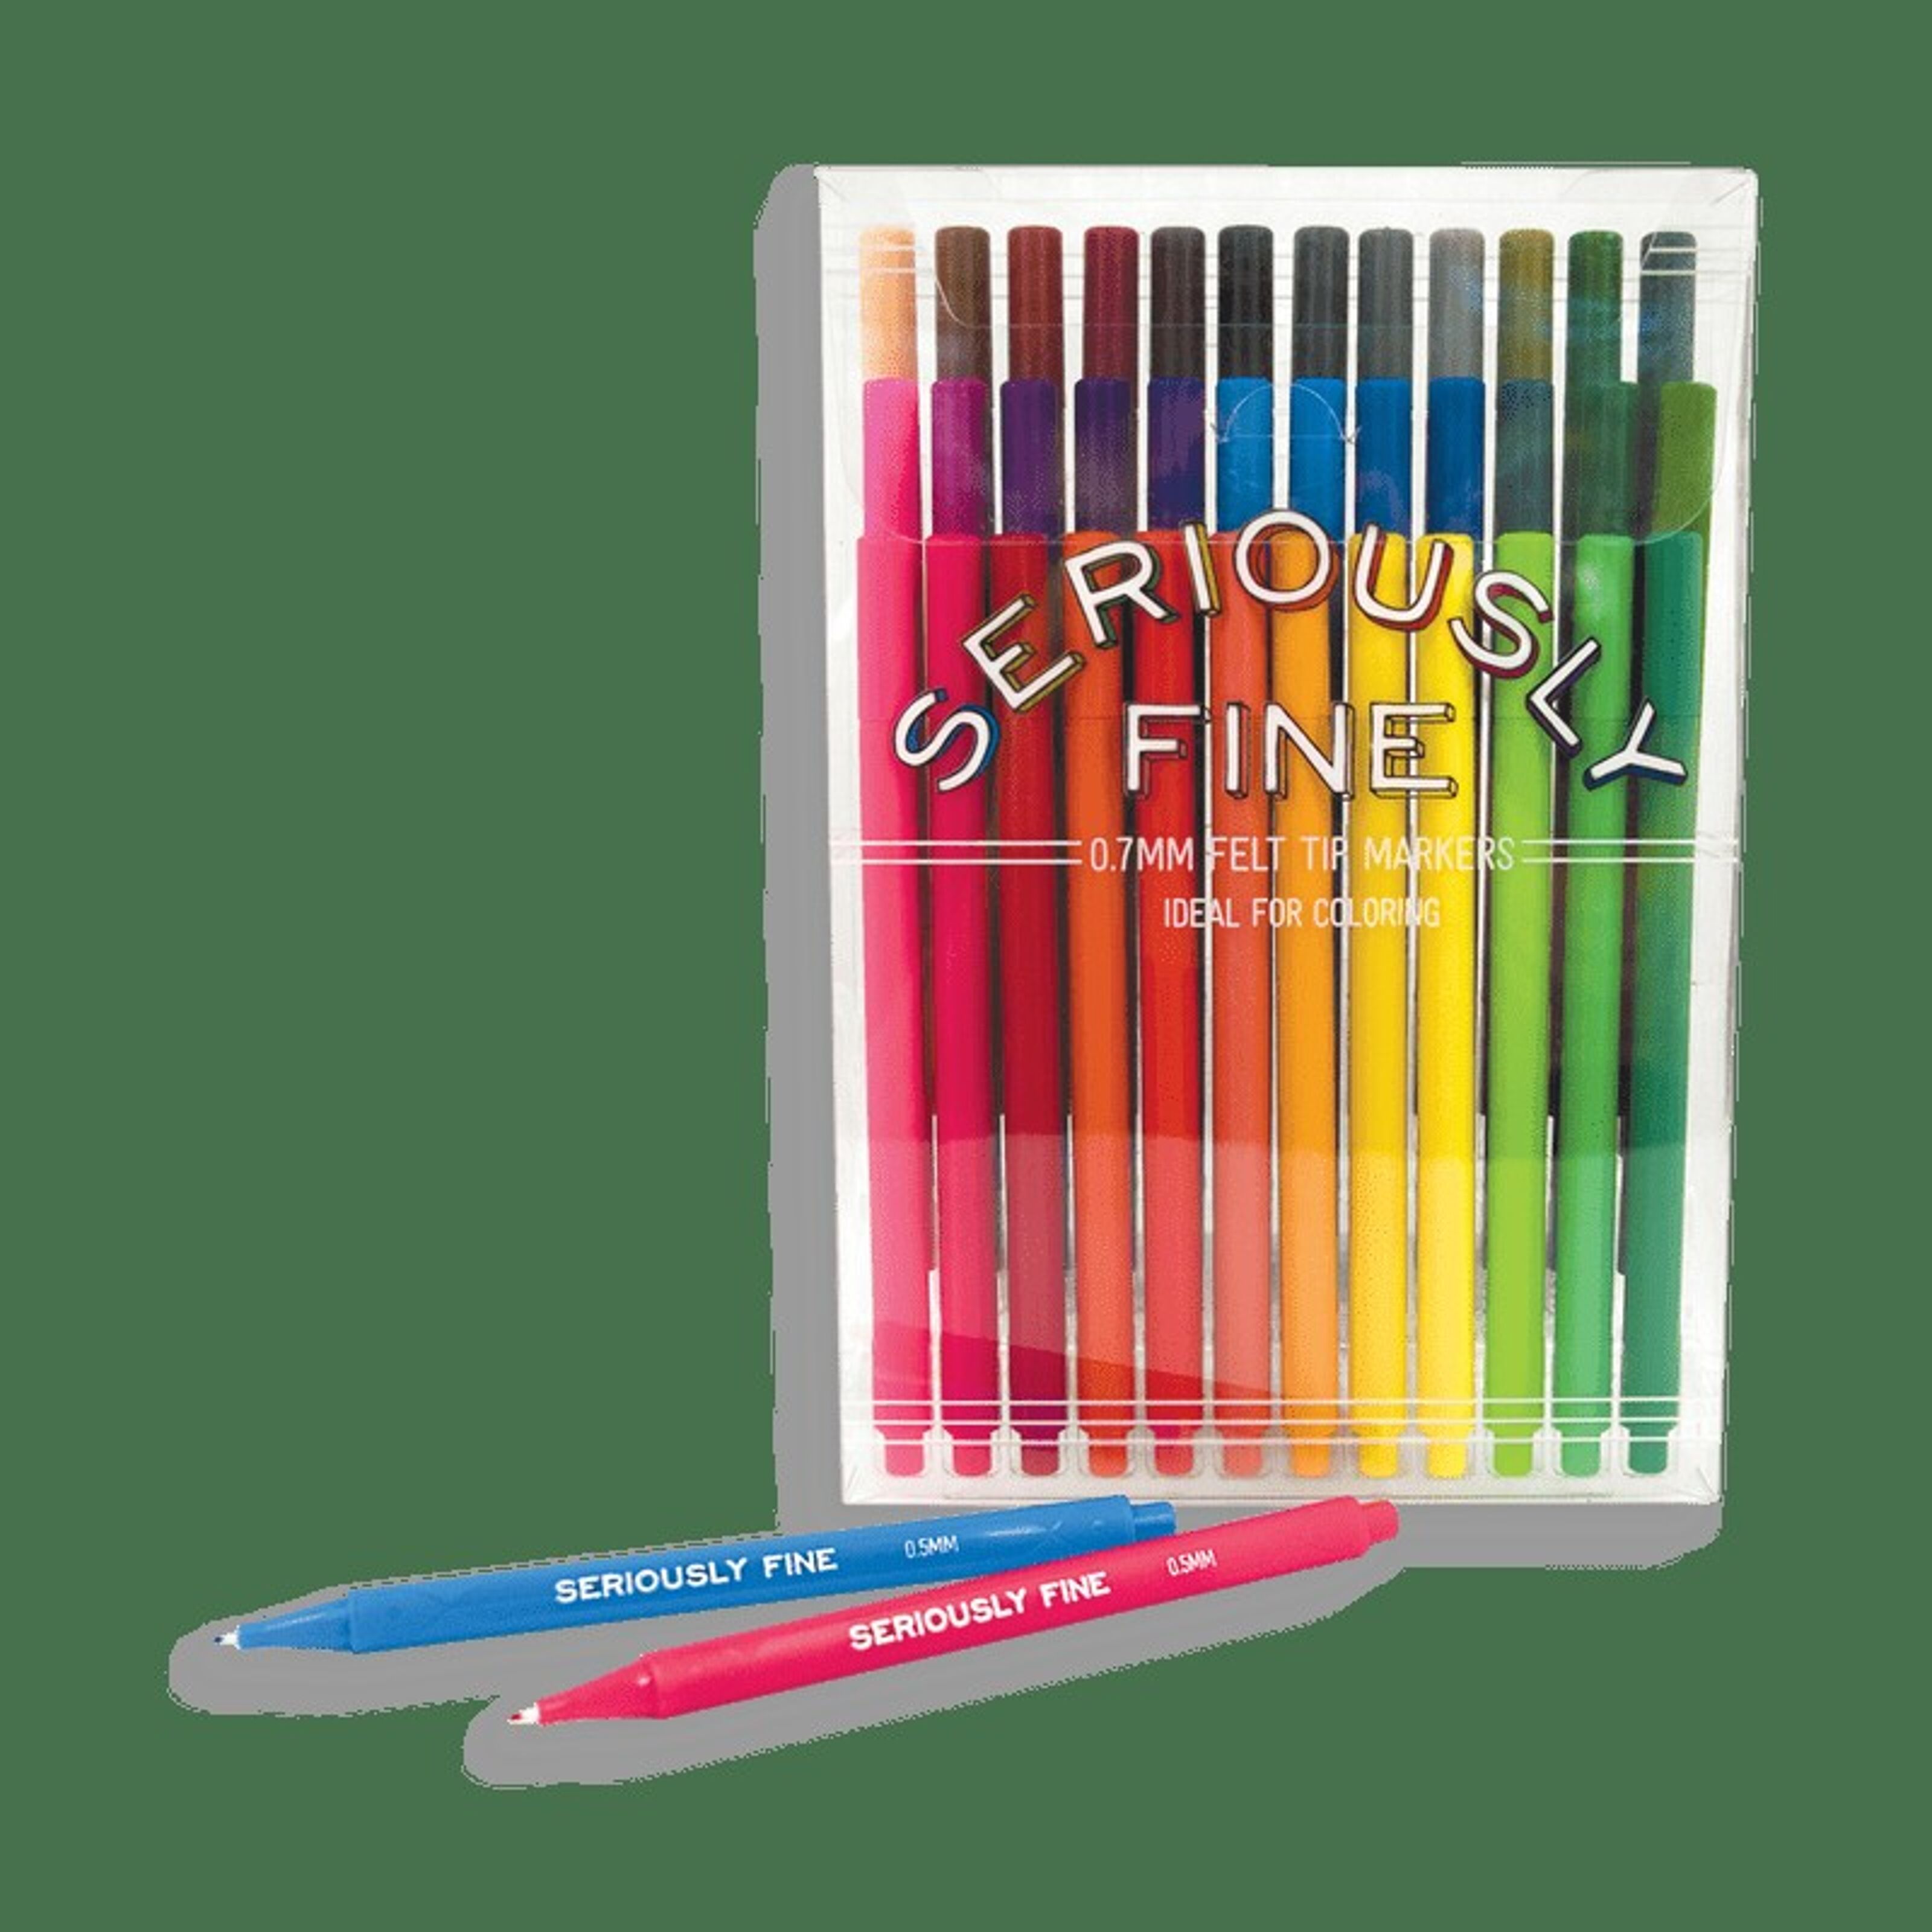 Buy wholesale Seriously fine felt tip markers